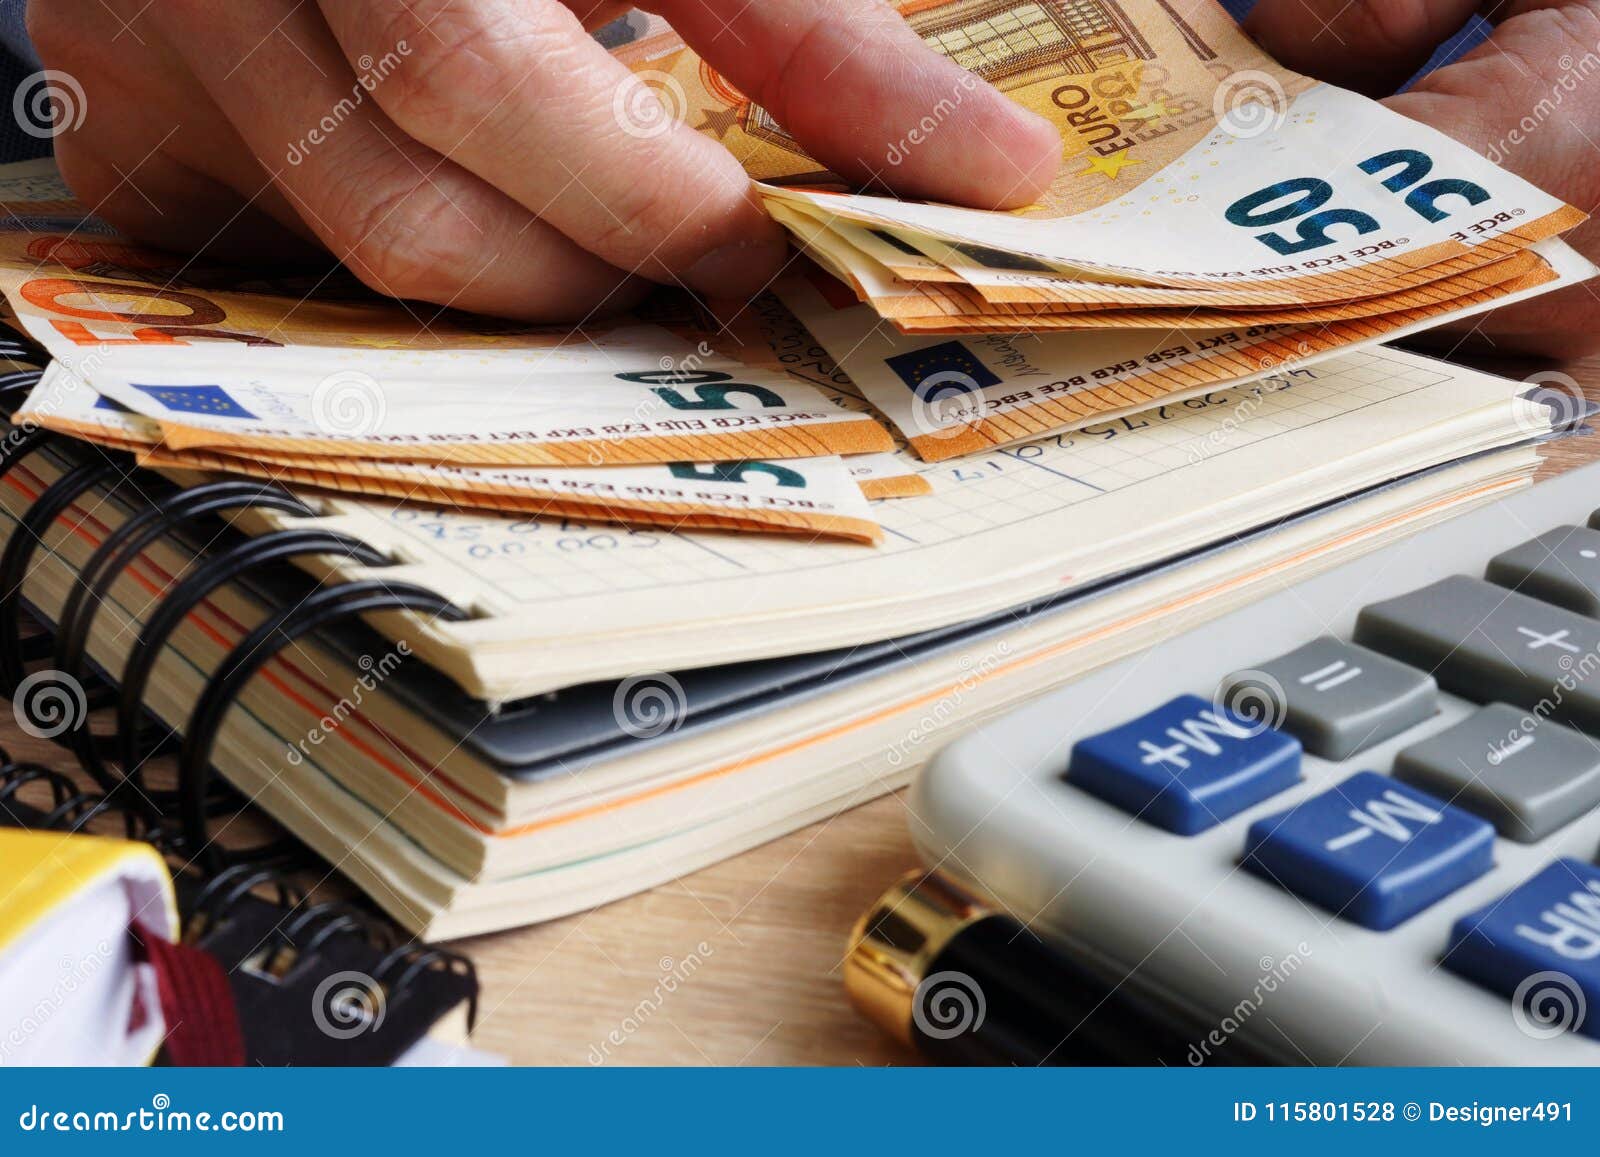 man counting euro banknotes. desk with calculator, ledger and euros.